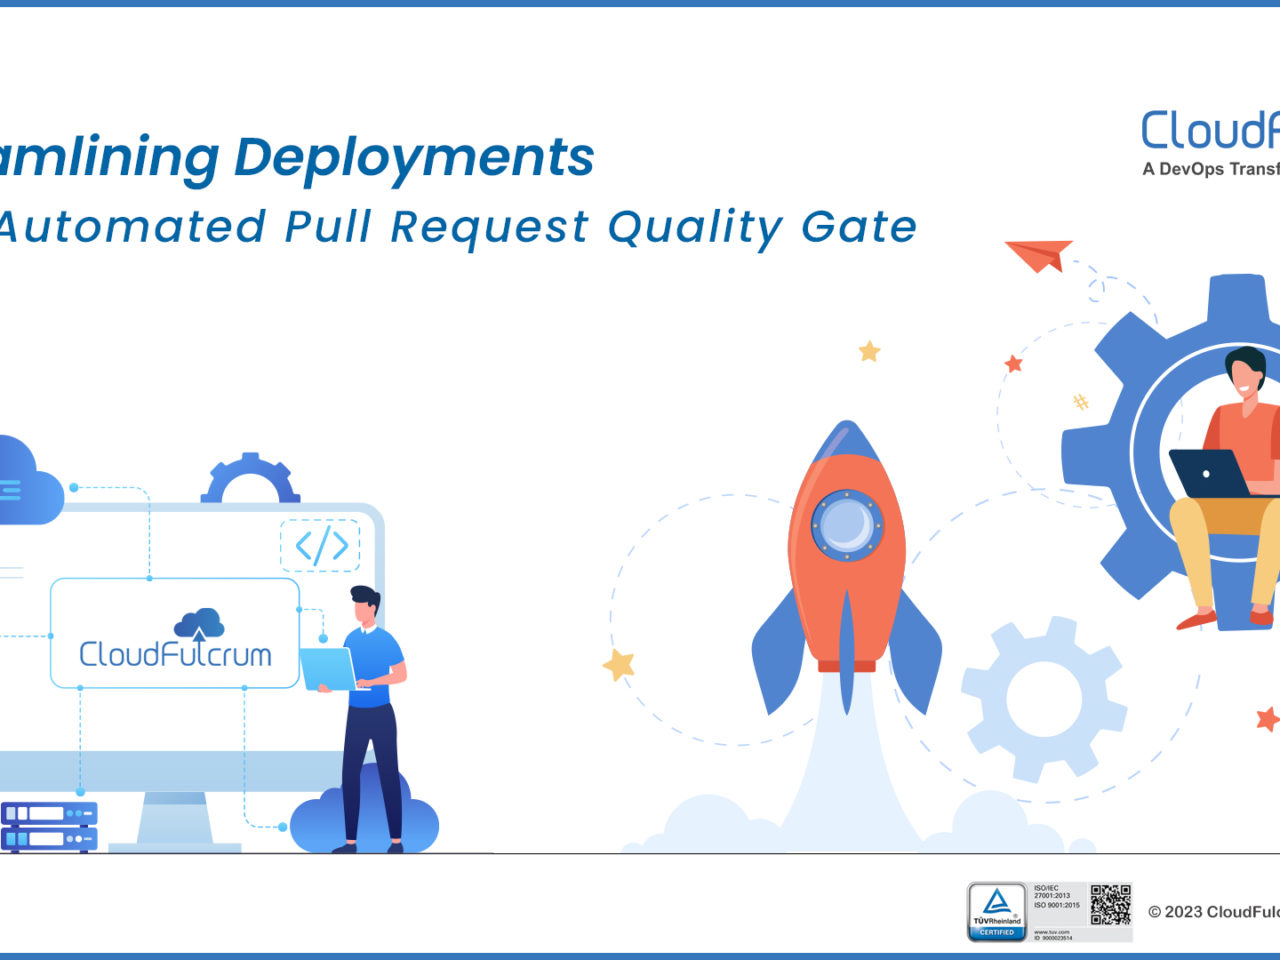 Streamlining Deployments with Automated Pull Request Quality Gate